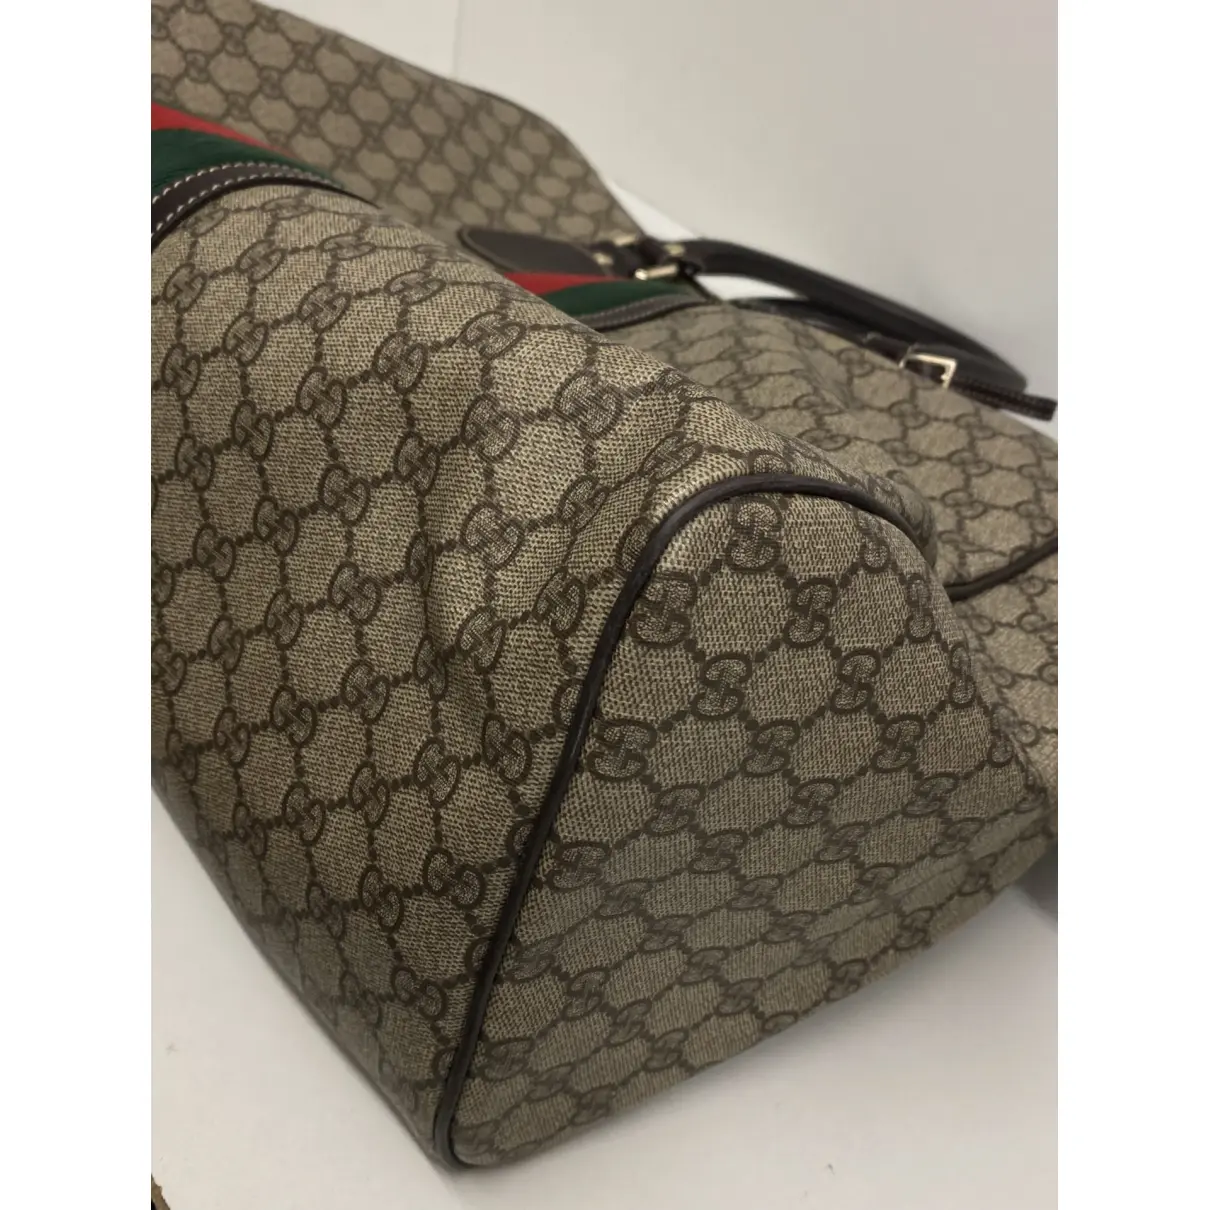 Buy Gucci Leather travel bag online